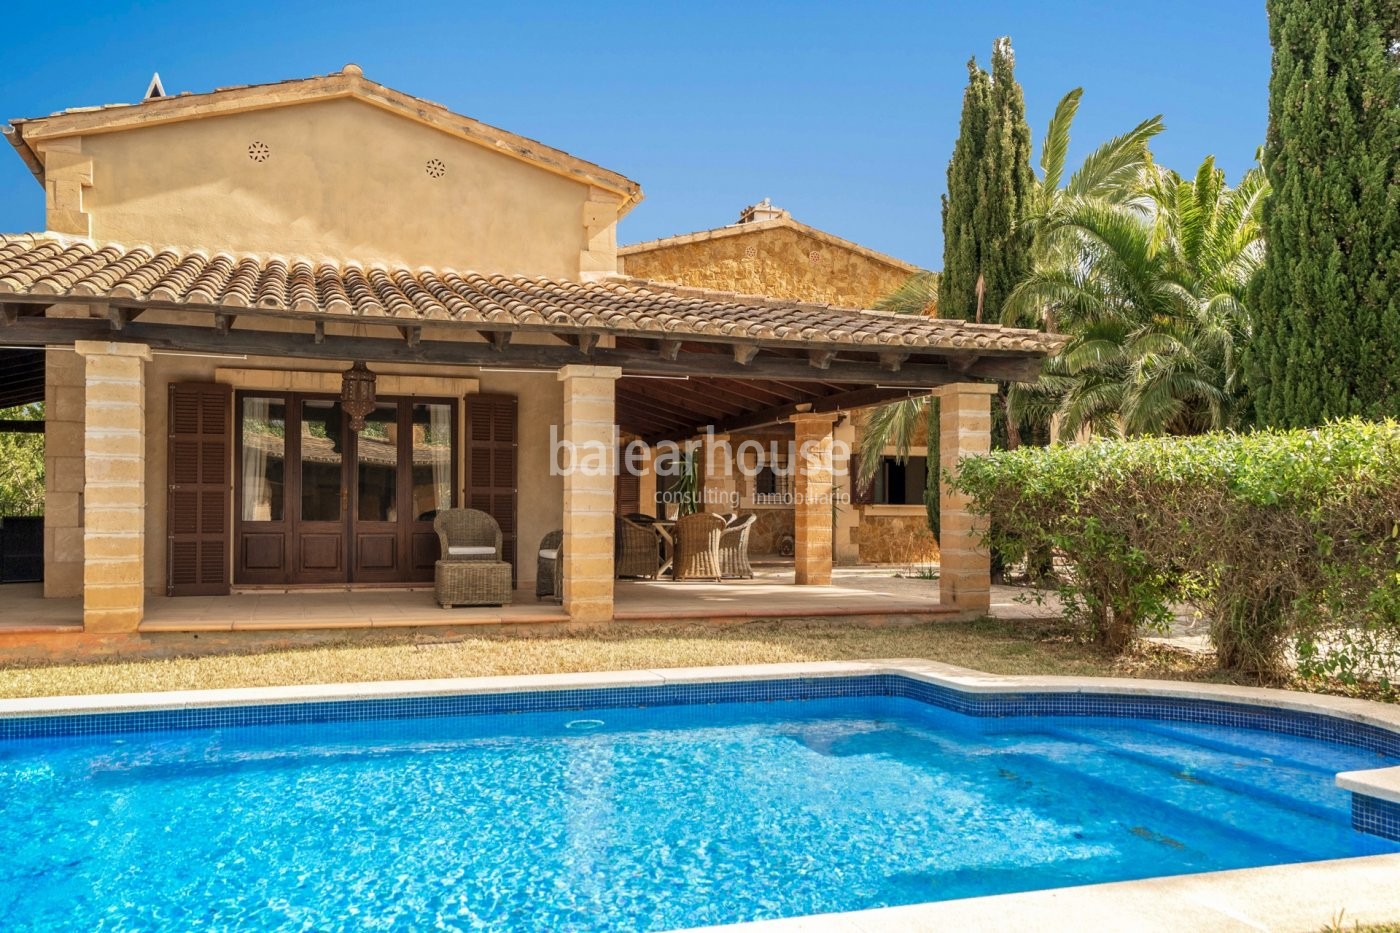 Beautiful property in Establiments full of charm, with terraces and gardens to enjoy all year round.